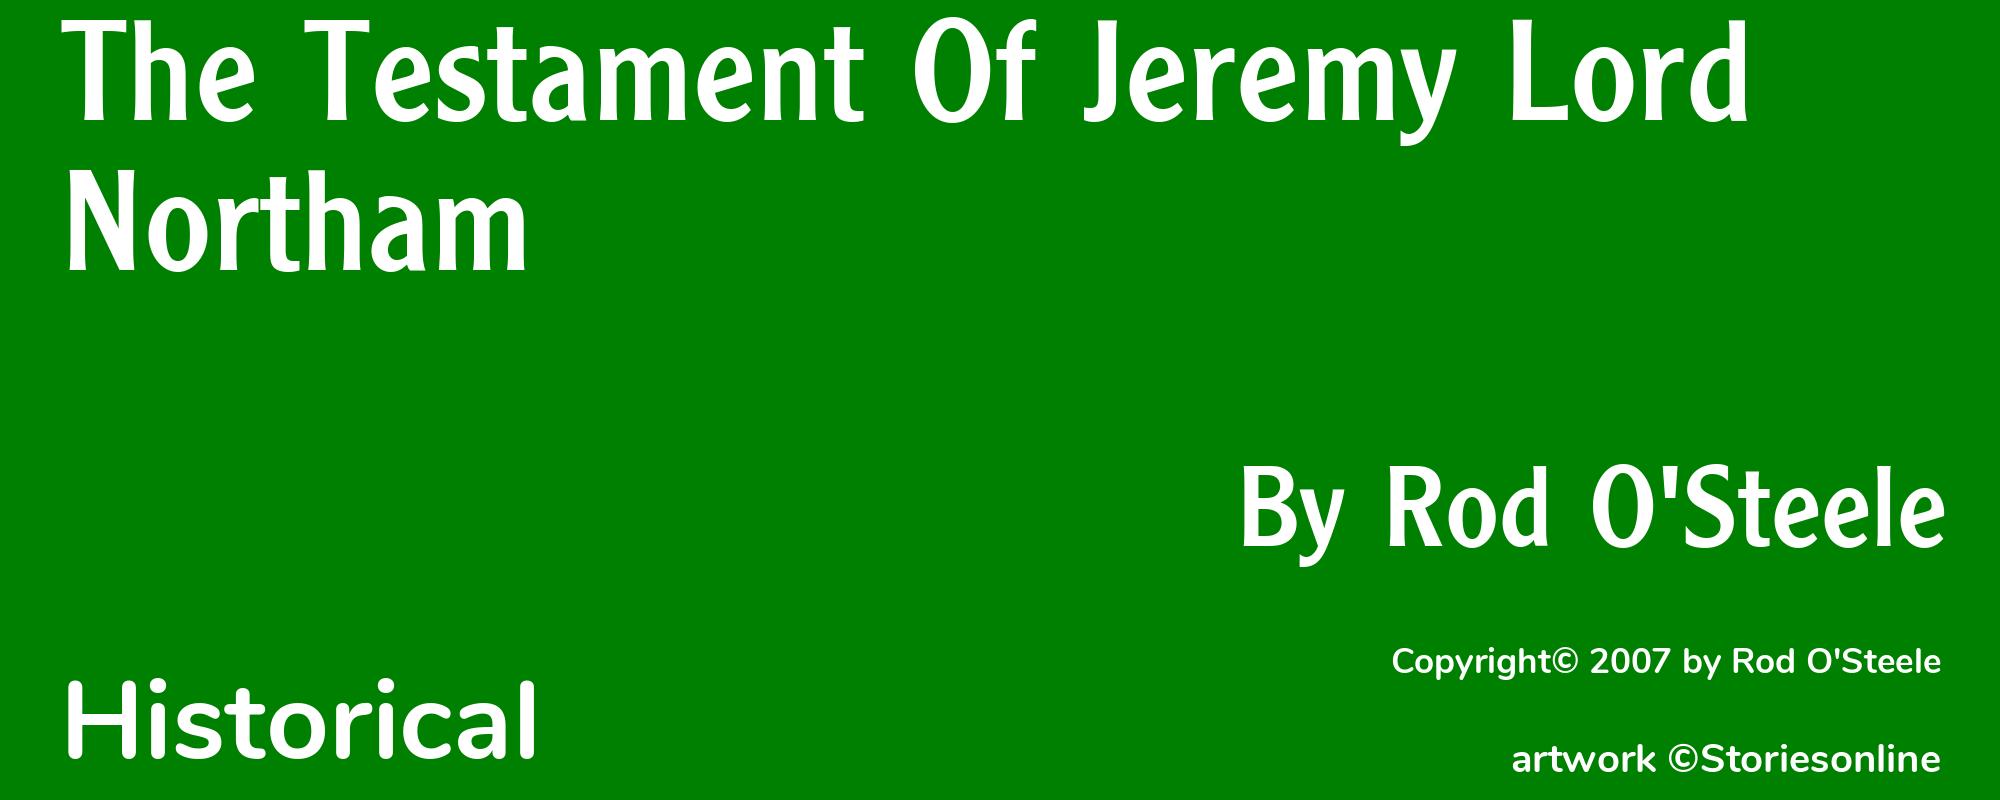 The Testament Of Jeremy Lord Northam - Cover